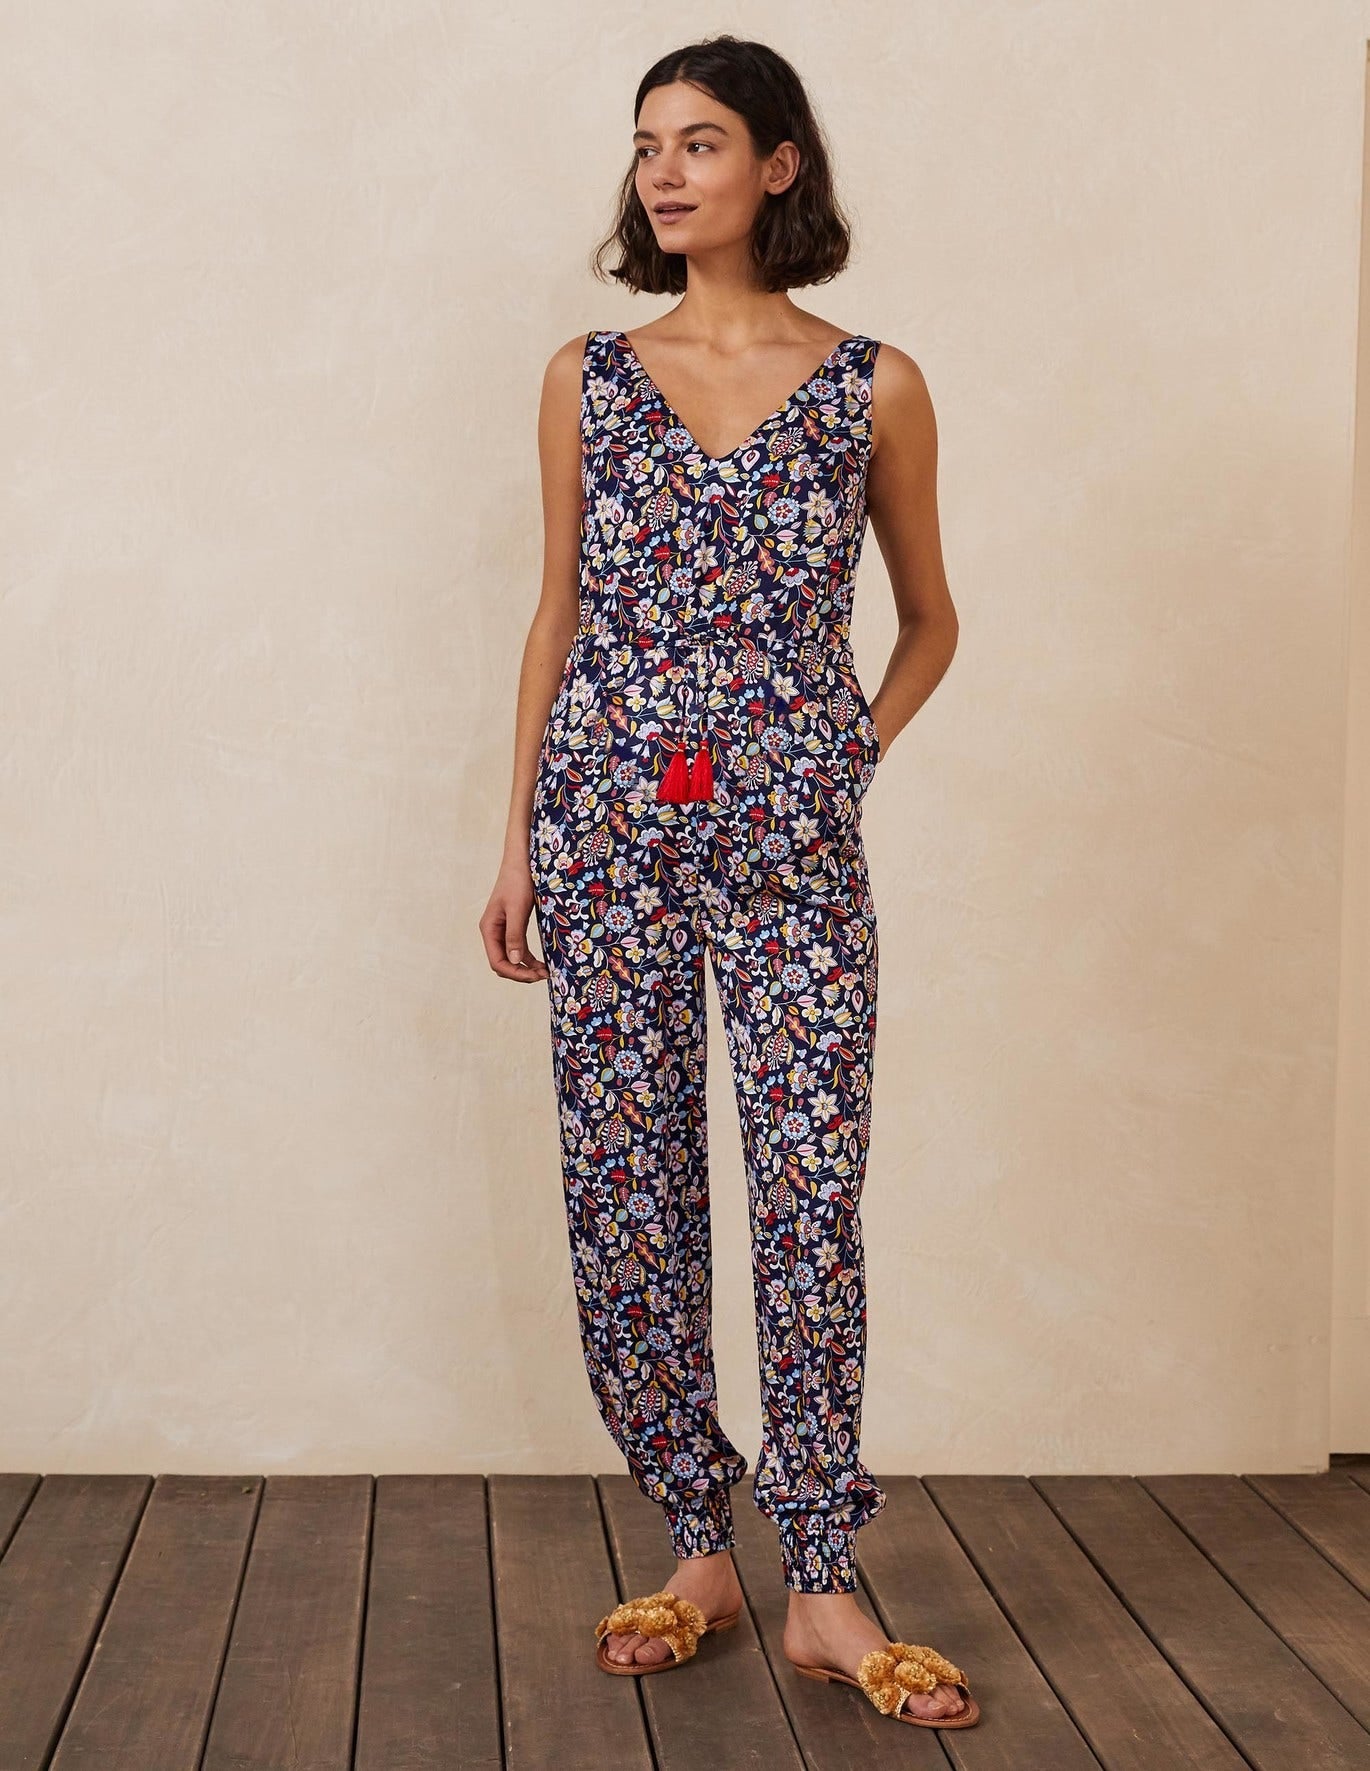 Boden Tie Waits Cecilia Jumpsuit - Floral - Navy Multi/Navy/Kaleidoscopic Floral - 12